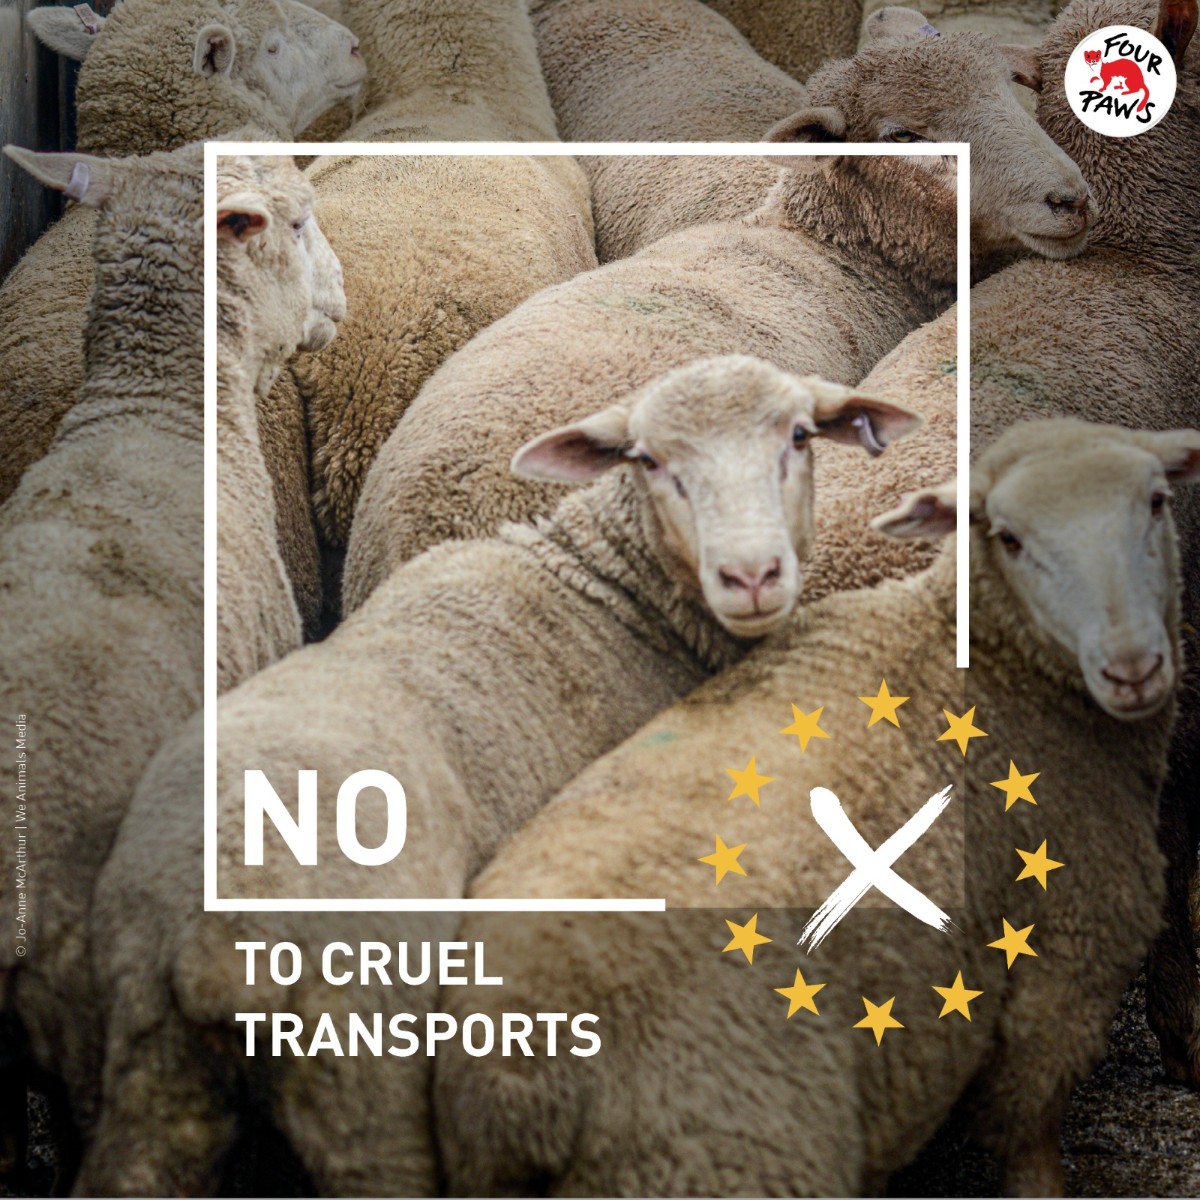 Many people think animal welfare standards for farm animals in the EU are high. This is not the case: Animals 🐑🐔🐖 born in the EU endure incredible agony 🚨 #DoBetterForAnimals and sign our pledge ➡️ brnw.ch/21wKfp5